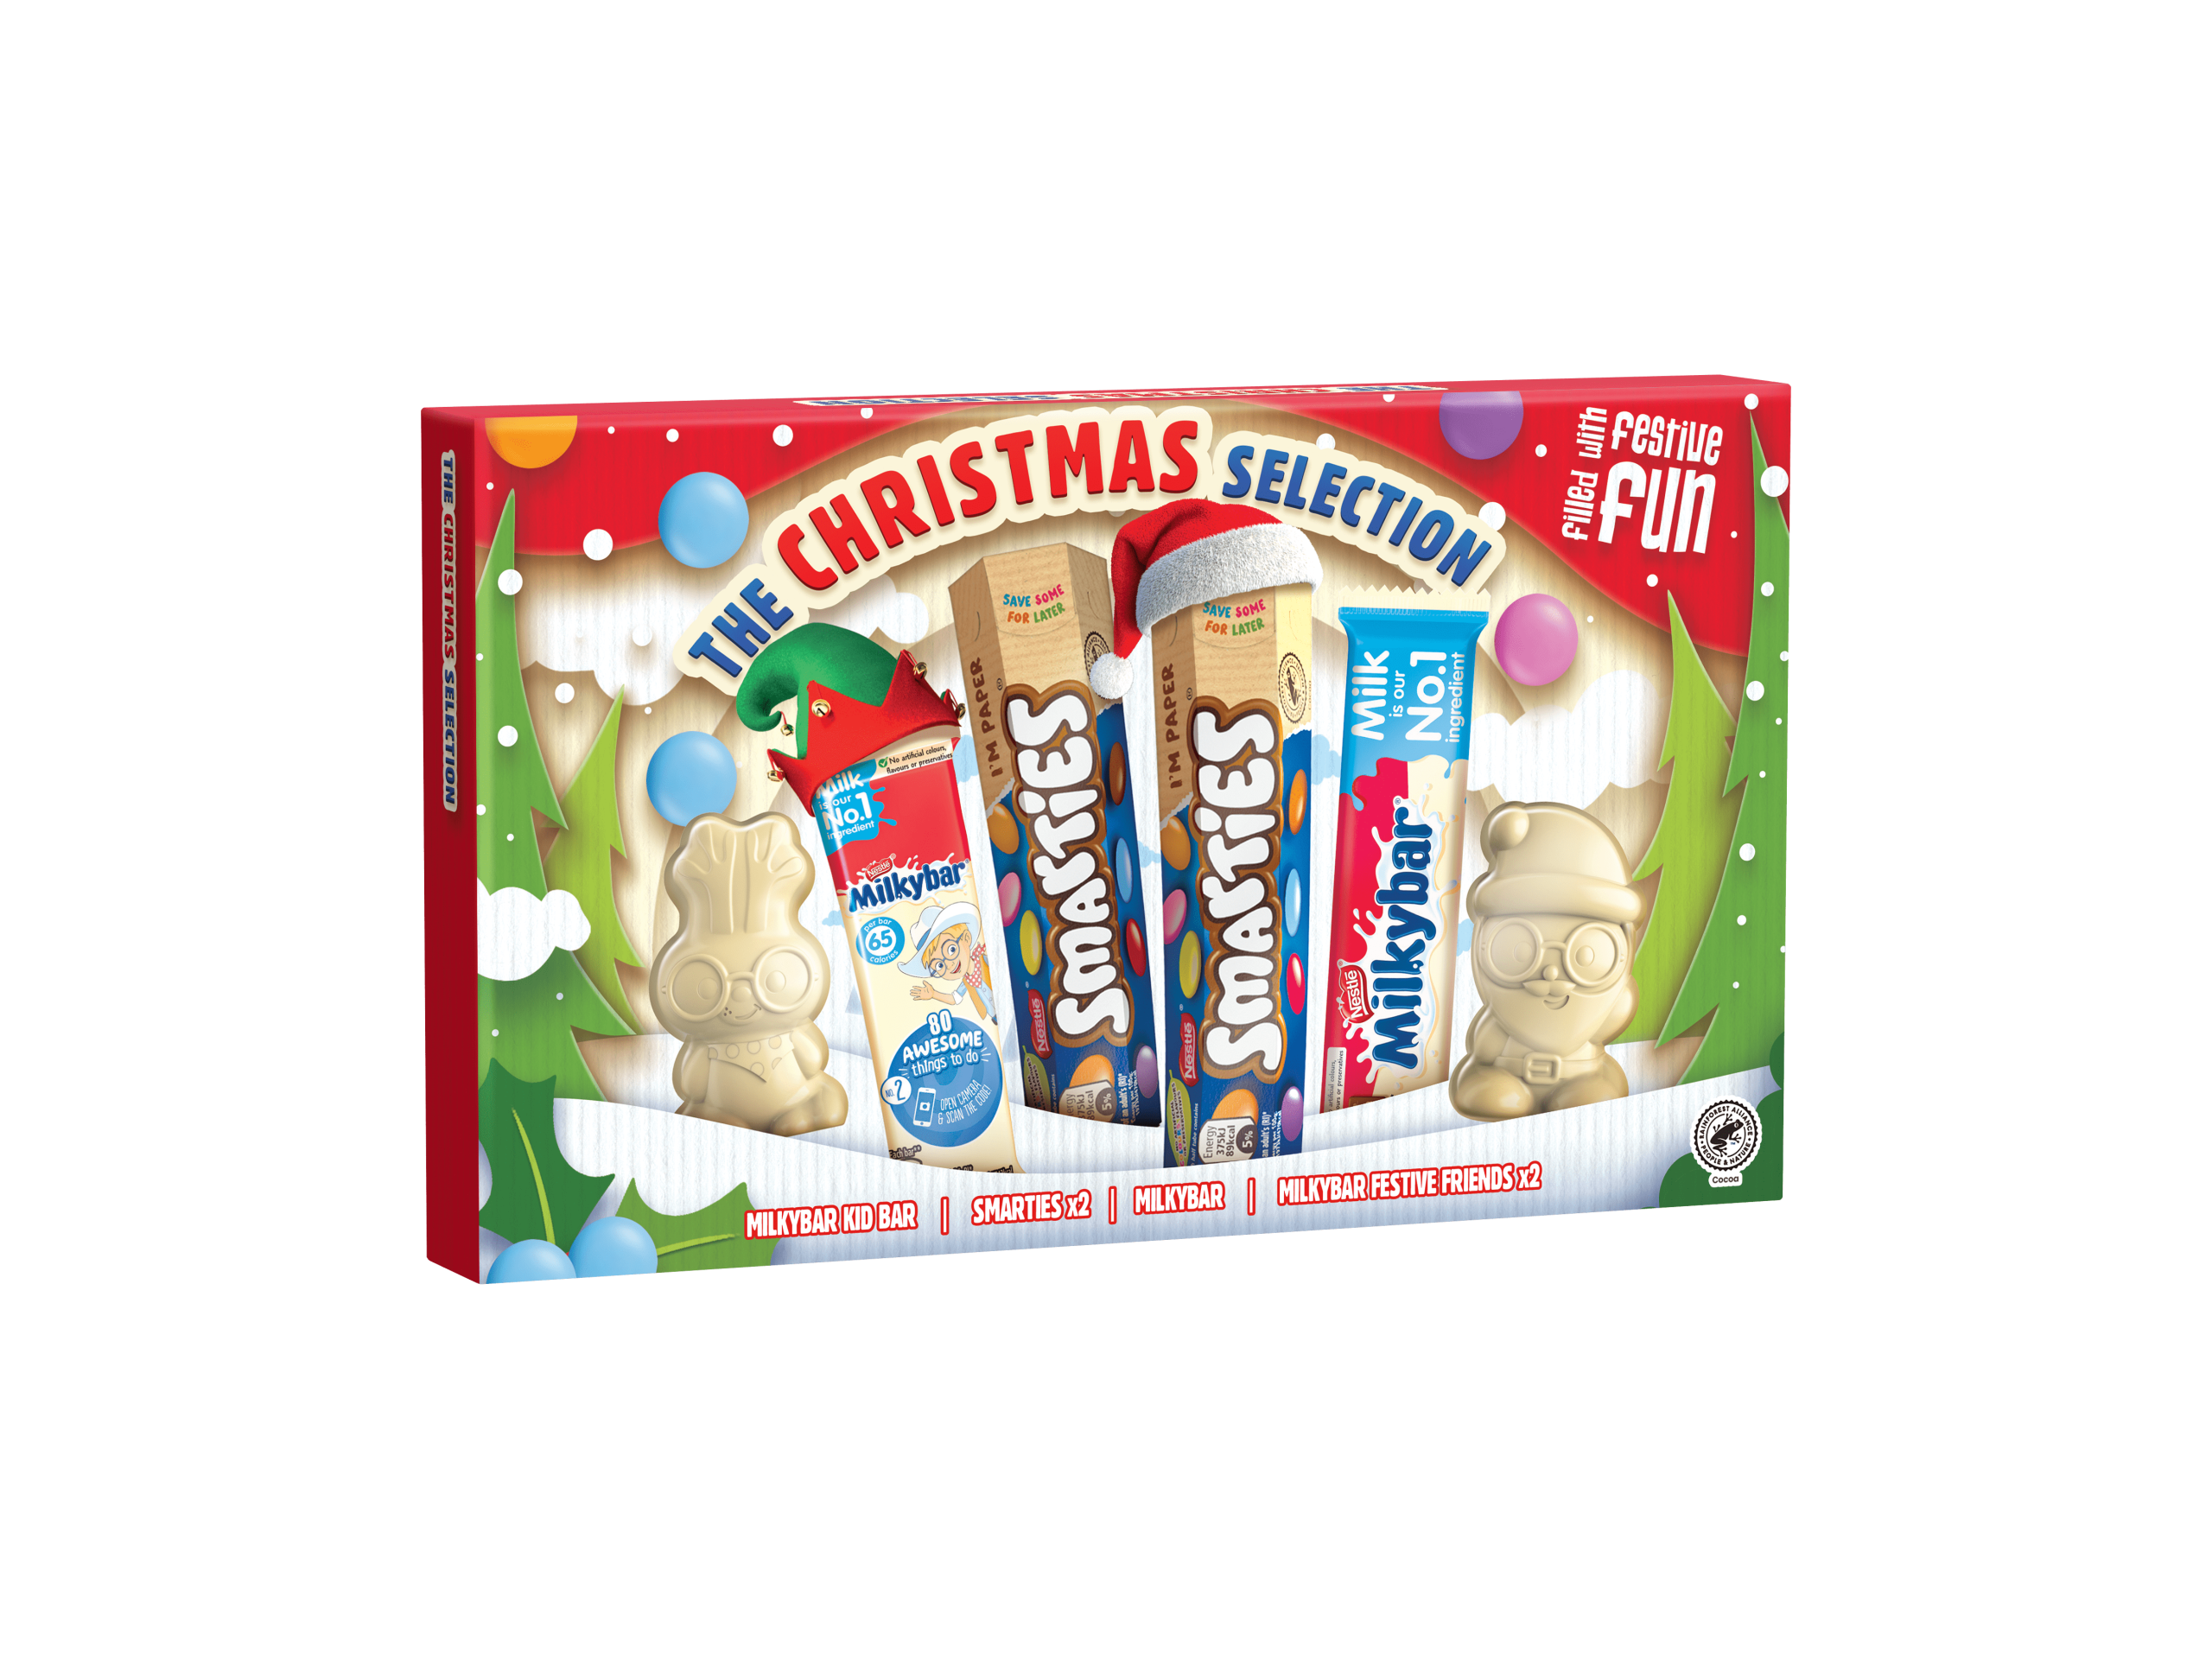 Nestlé Confectionery brings Christmas cheer with news from big brands